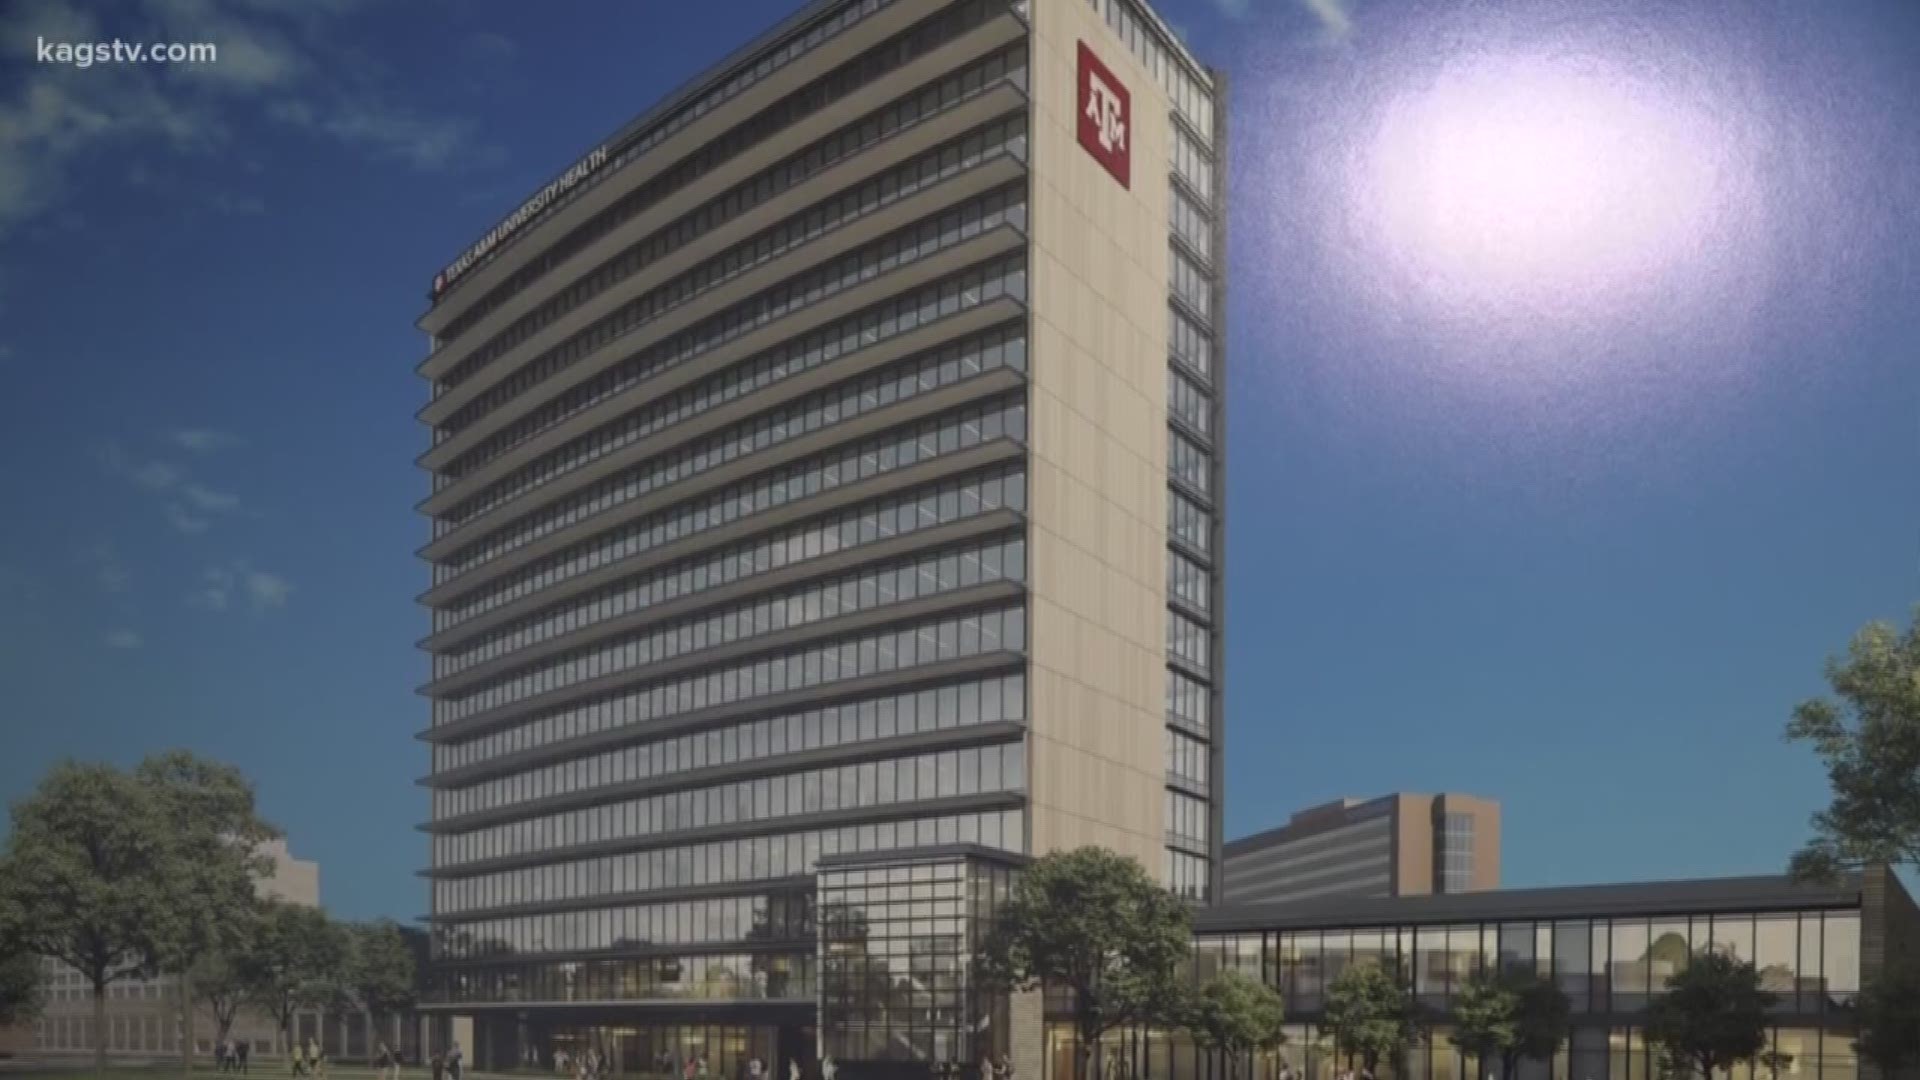 The complex is the largest development project in the Texas Medical Center area. It will help house TAMU's Engineering Medicine program.